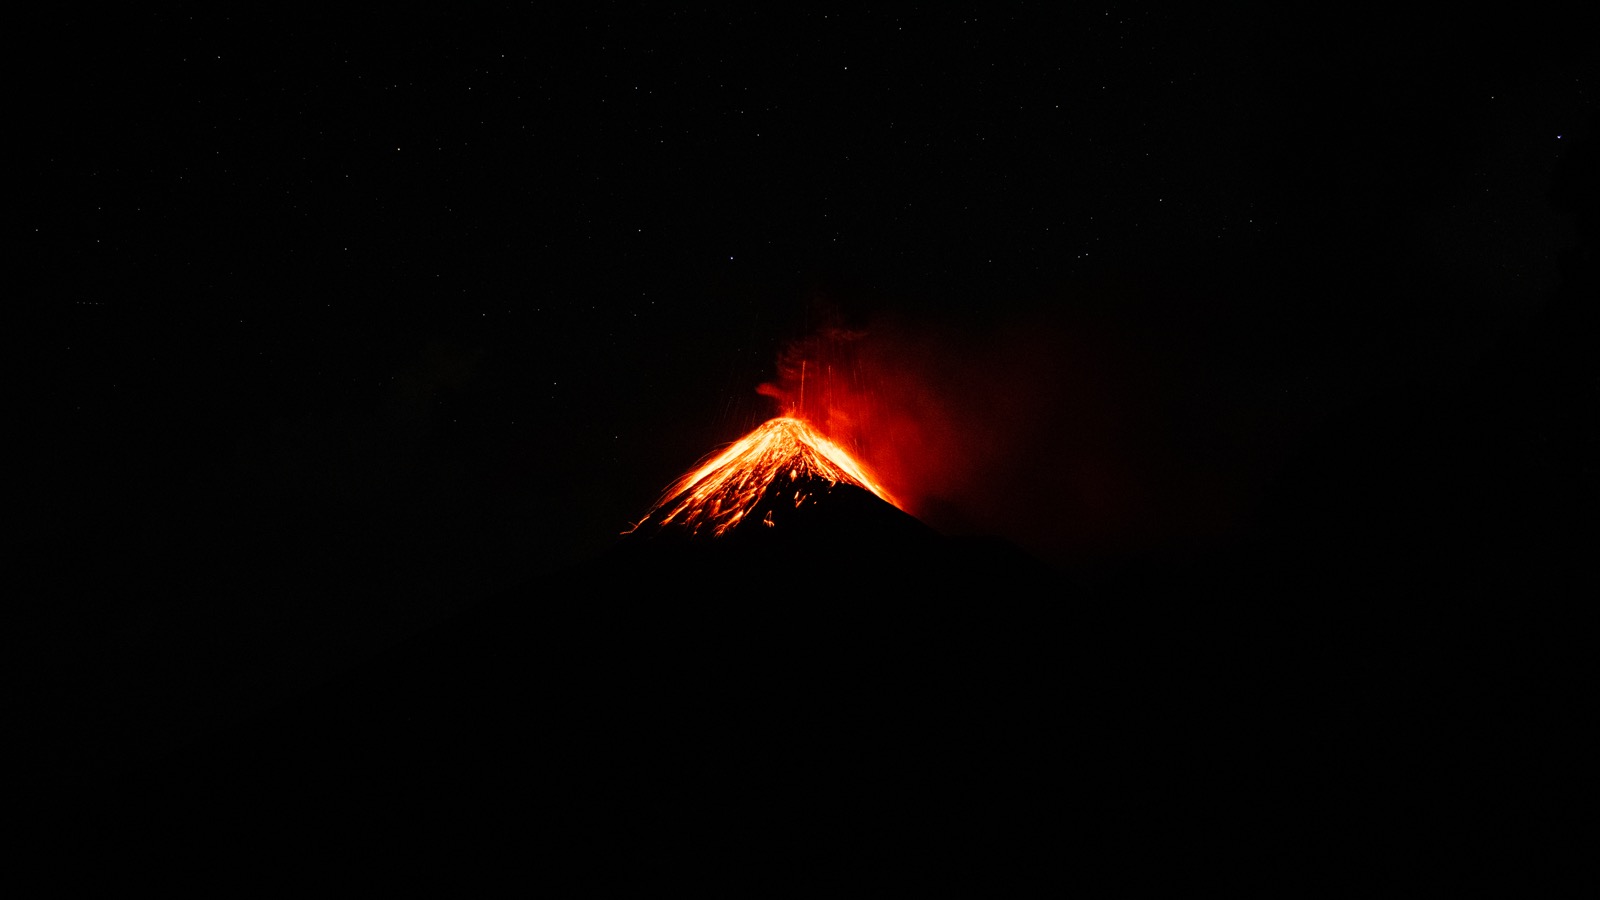 Can We Guess If You’re a Boomer, Gen X’er, Millennial or Gen Z’er Just Based on Your ✈️ Travel Preferences? Hike the Santiaguito Volcano in Guatemala